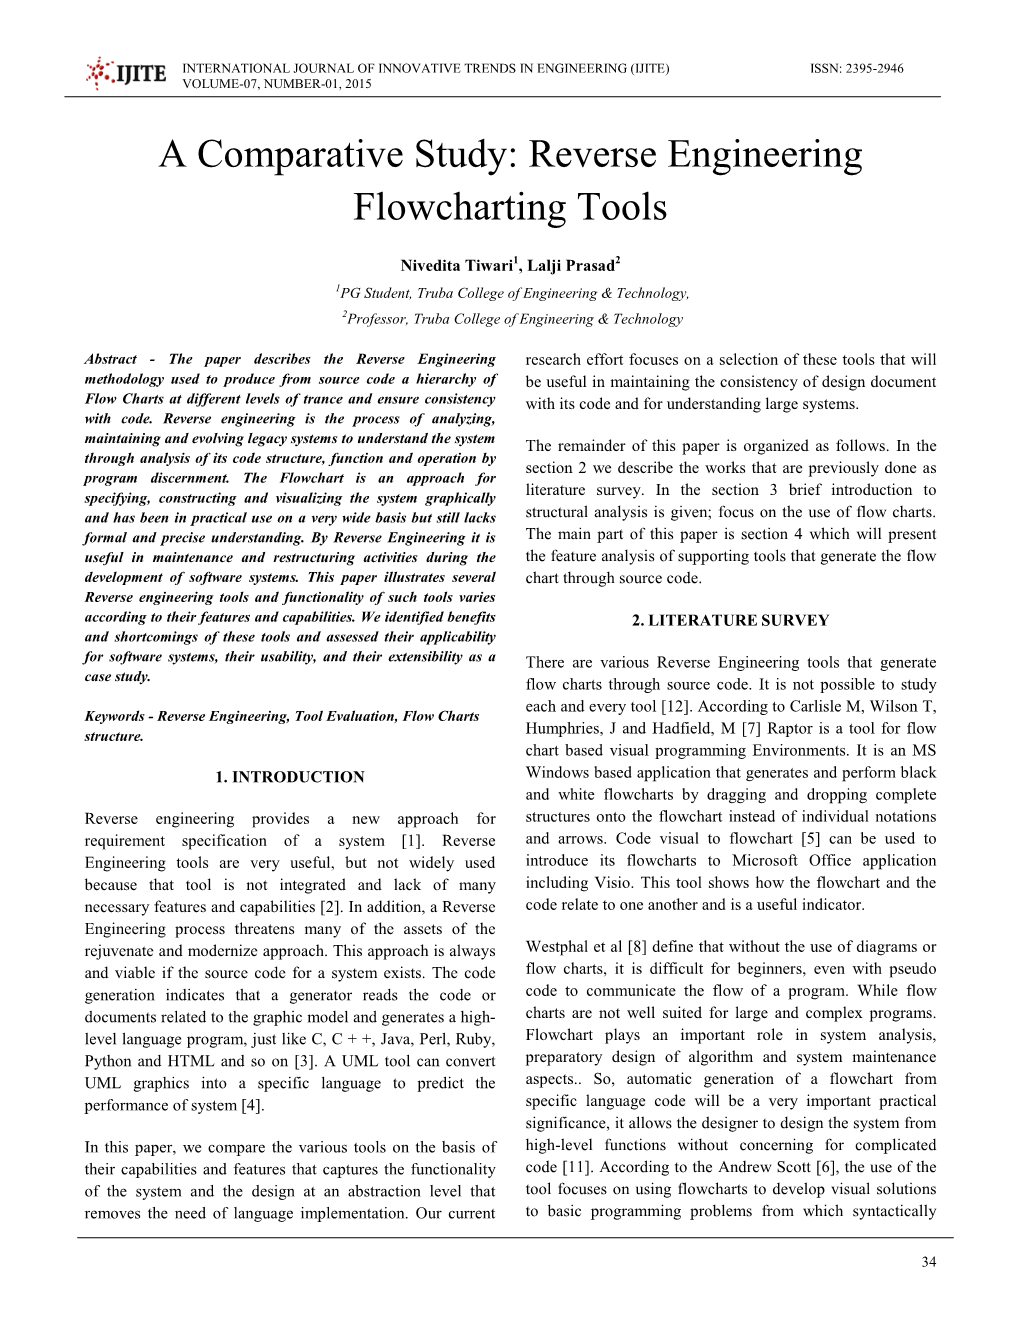 A Comparative Study: Reverse Engineering Flowcharting Tools